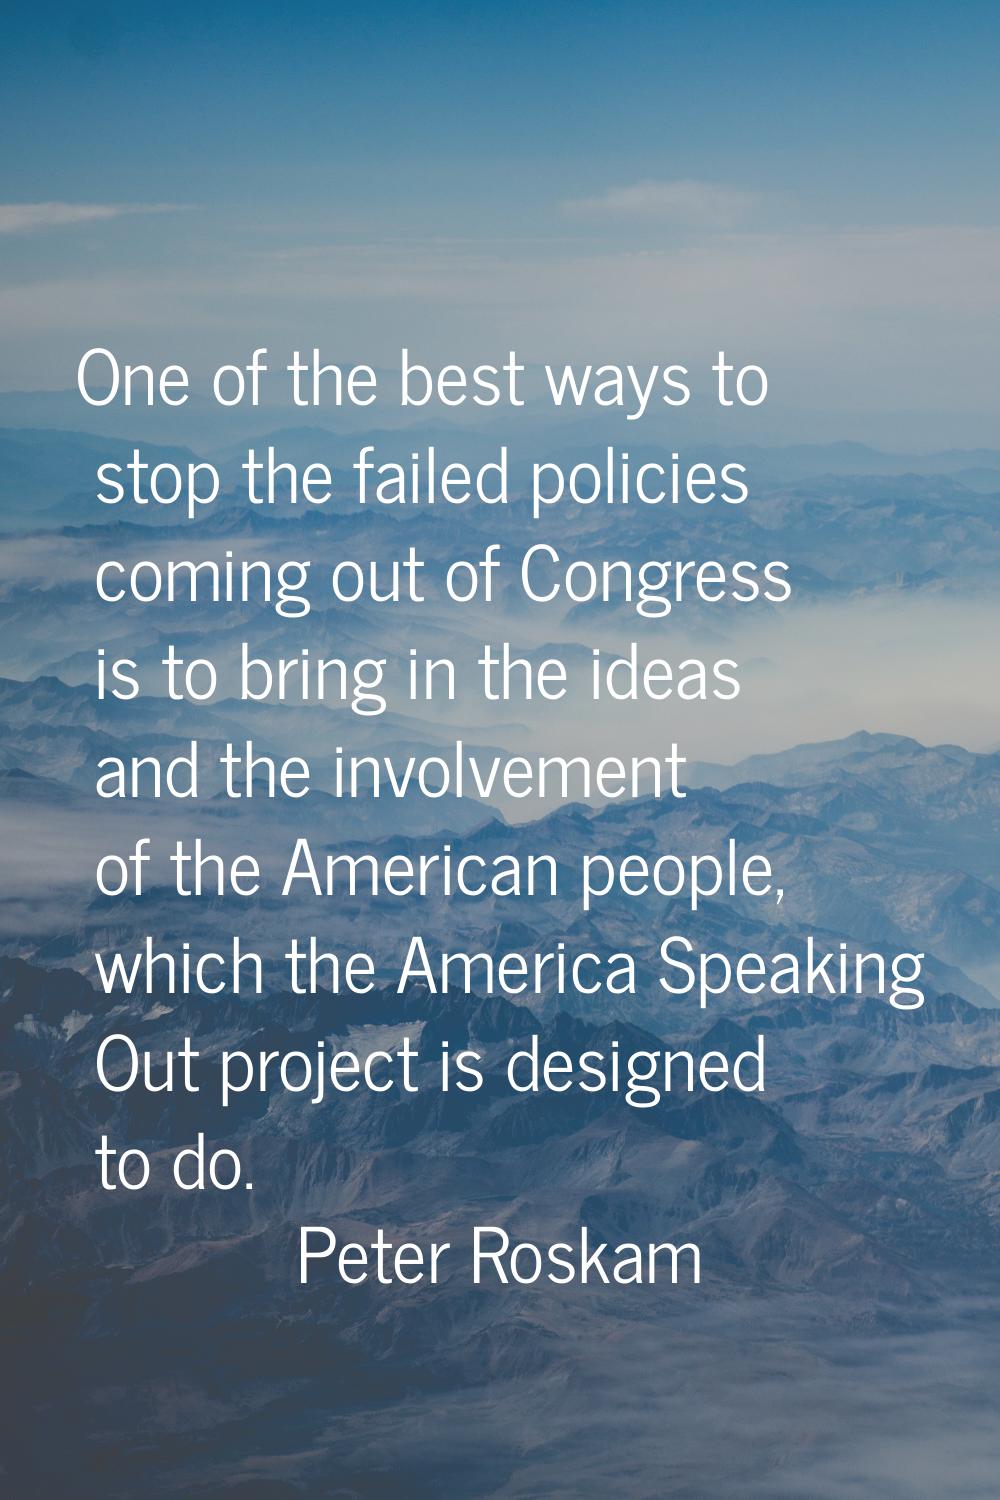 One of the best ways to stop the failed policies coming out of Congress is to bring in the ideas an